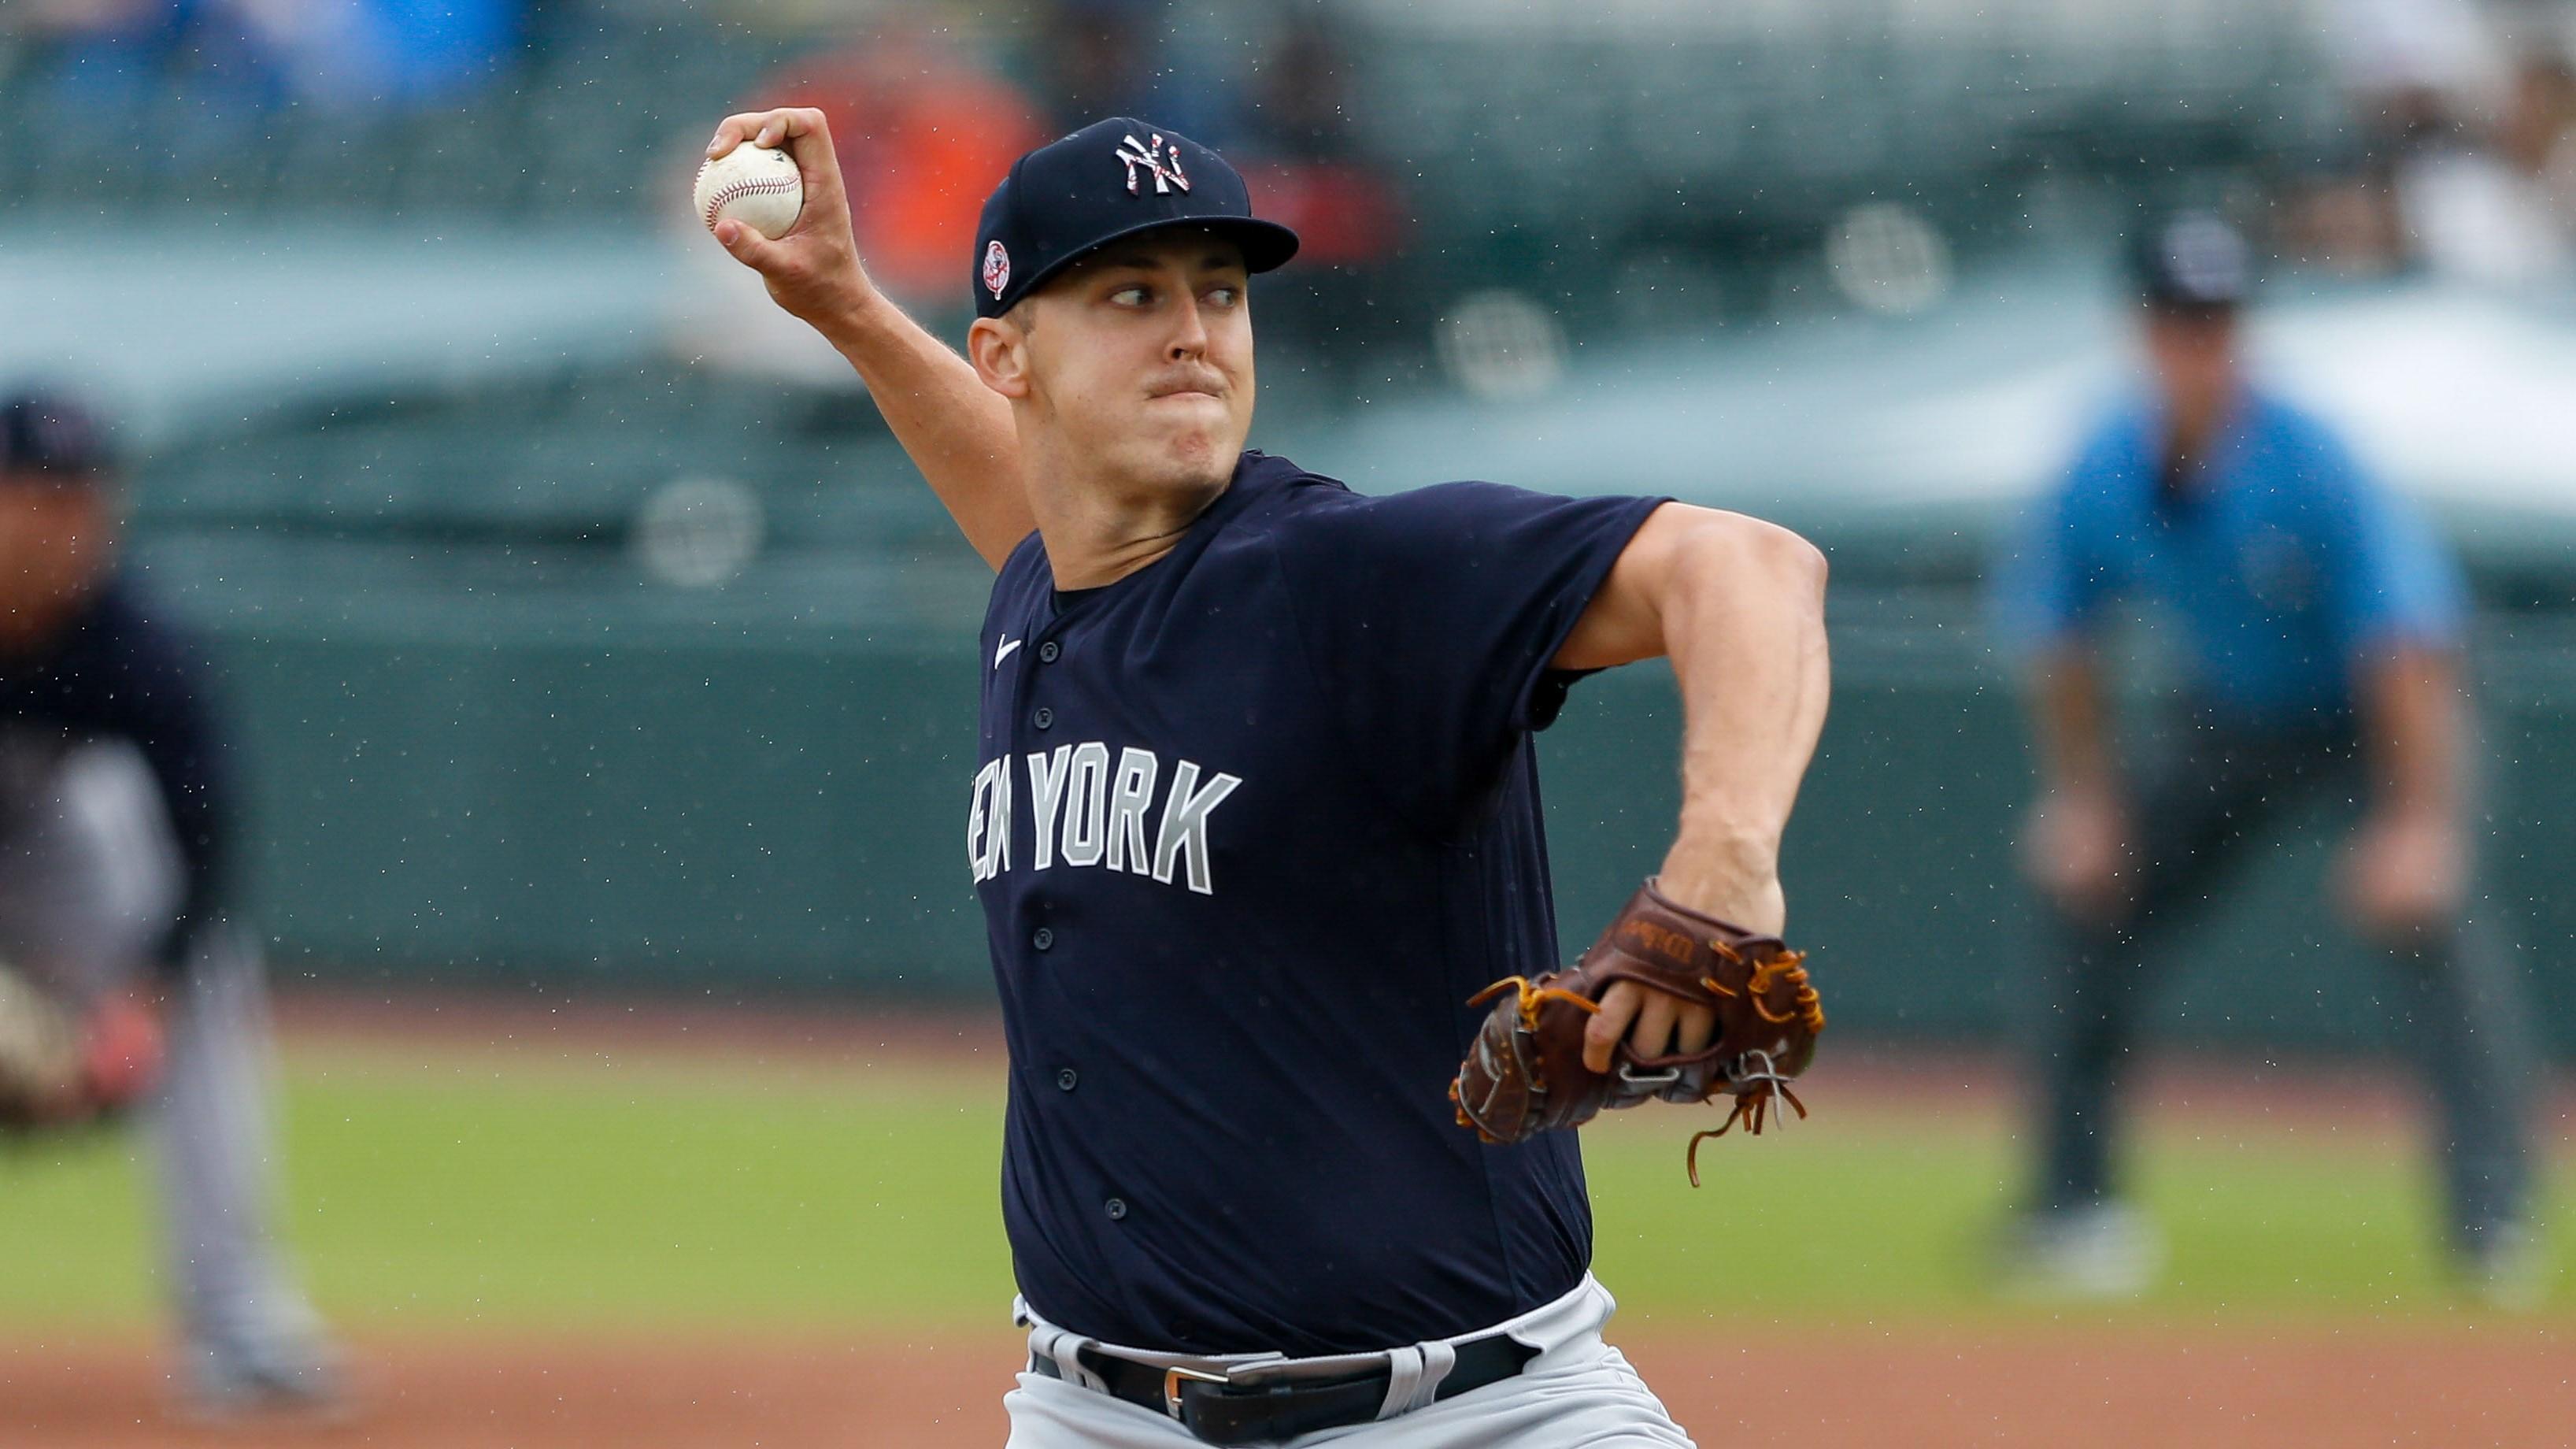 Mar 6, 2021; Bradenton, Florida, USA; New York Yankees starting pitcher Jameson Taillon (50) pitches in the second inning during spring training at LECOM Park. Mandatory Credit: Nathan Ray Seebeck-USA TODAY Sports / Nathan Ray Seebeck-USA TODAY Sports